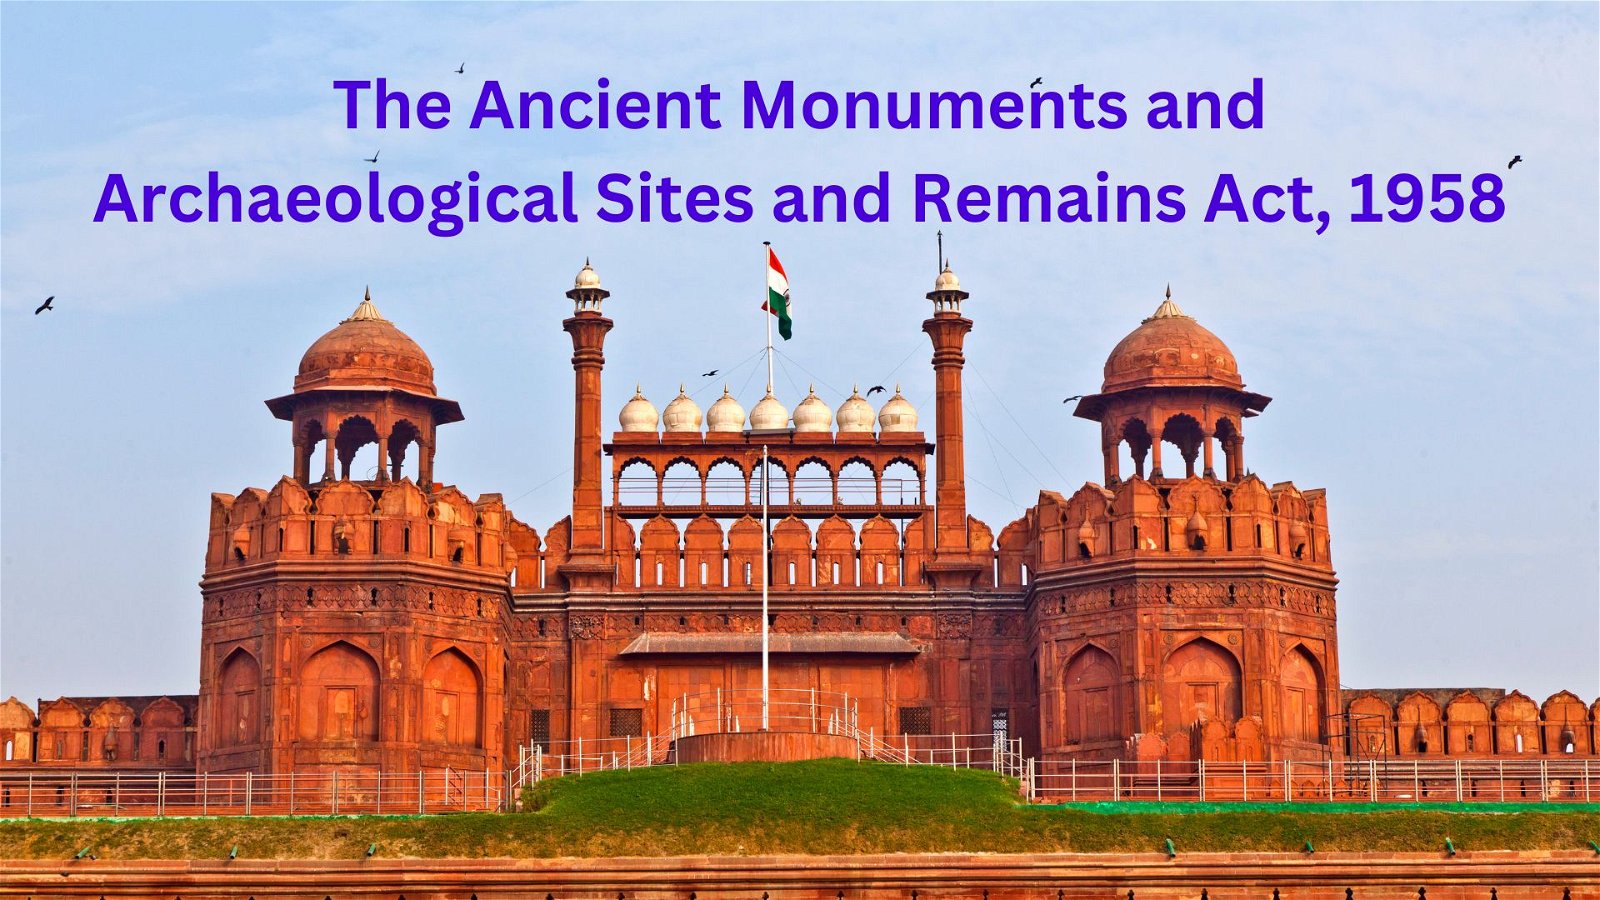 The Ancient Monuments and Archaeological Sites and Remains Act